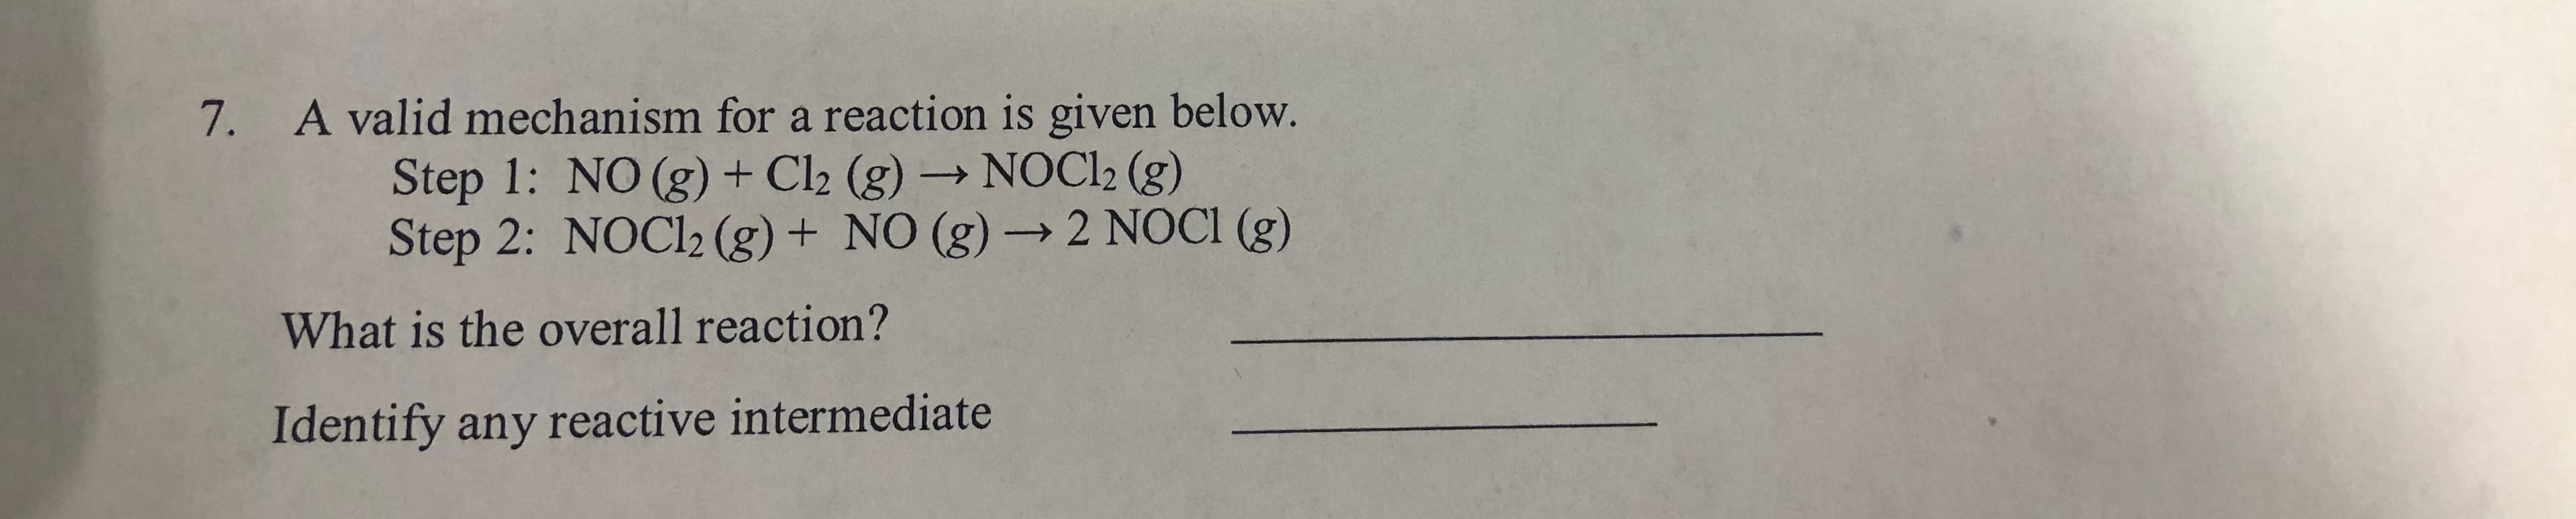 7.
A valid mechanism for a reaction is given below.
Step 1: NO (g) + Cl2 (g) → NOCI2 (g)
Step 2: NOCI2 (g) + NO (g) -→ 2 NOCI (g)
What is the overall reaction?
Identify any reactive intermediate
